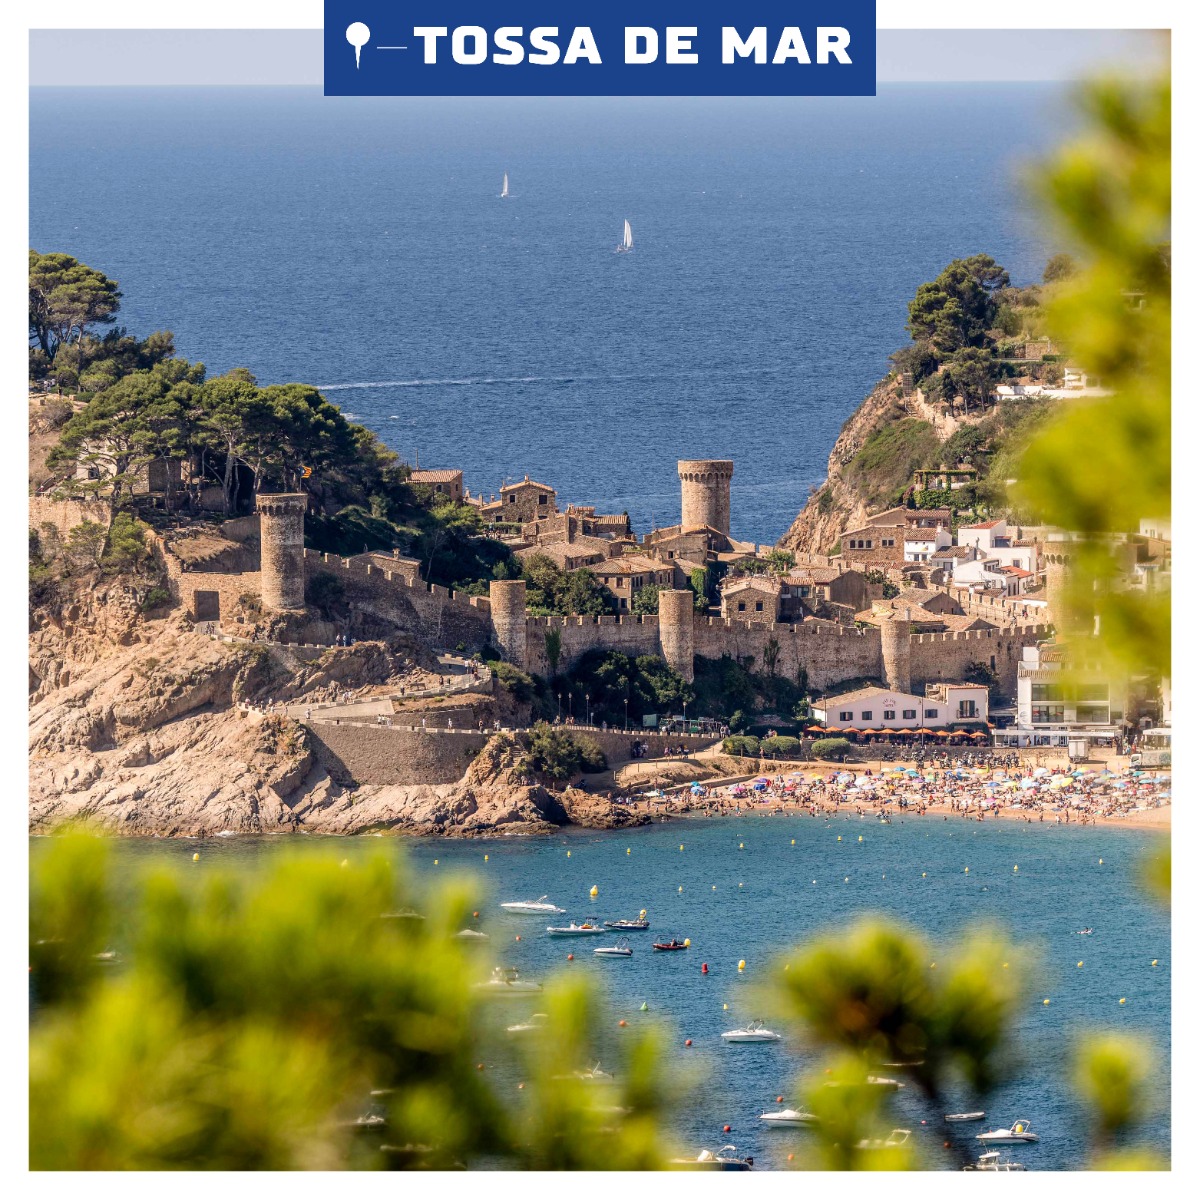 A panoramic photo of Tossa de Mar, seen from a distance, with the medieval city walls standing atop a hill surrounded by the azure waters of the Mediterranean Sea.